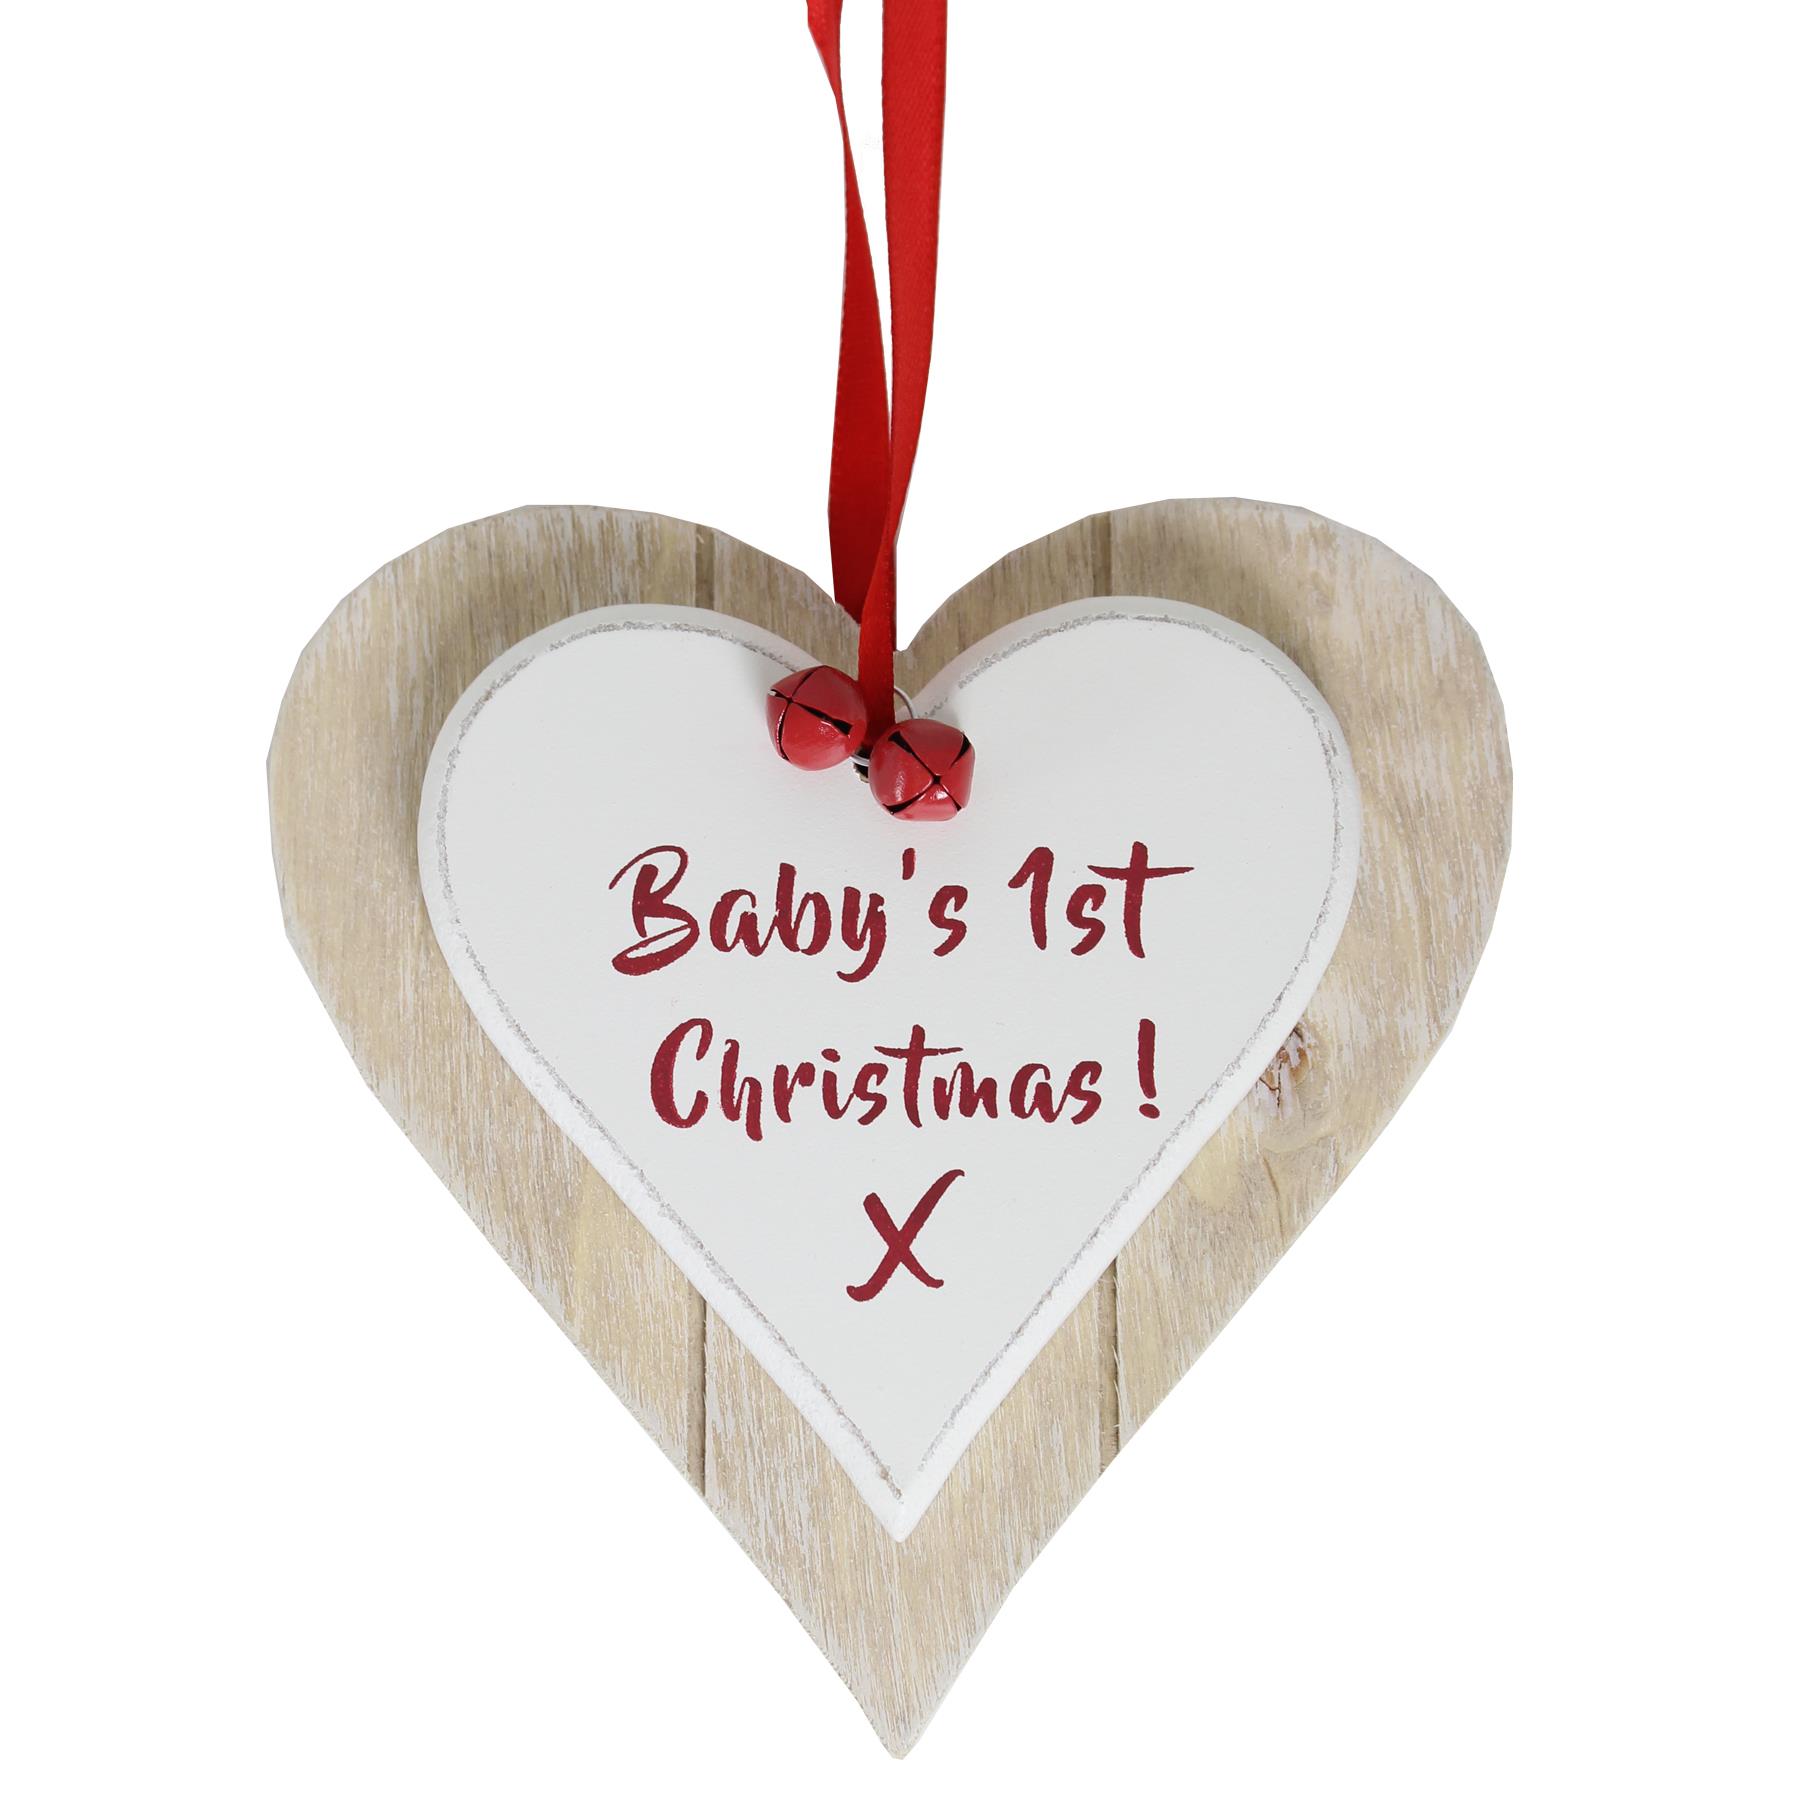 Double Layer Wooden Hanging Shabby Chic Heart Plaque - Baby's 1st Christmas